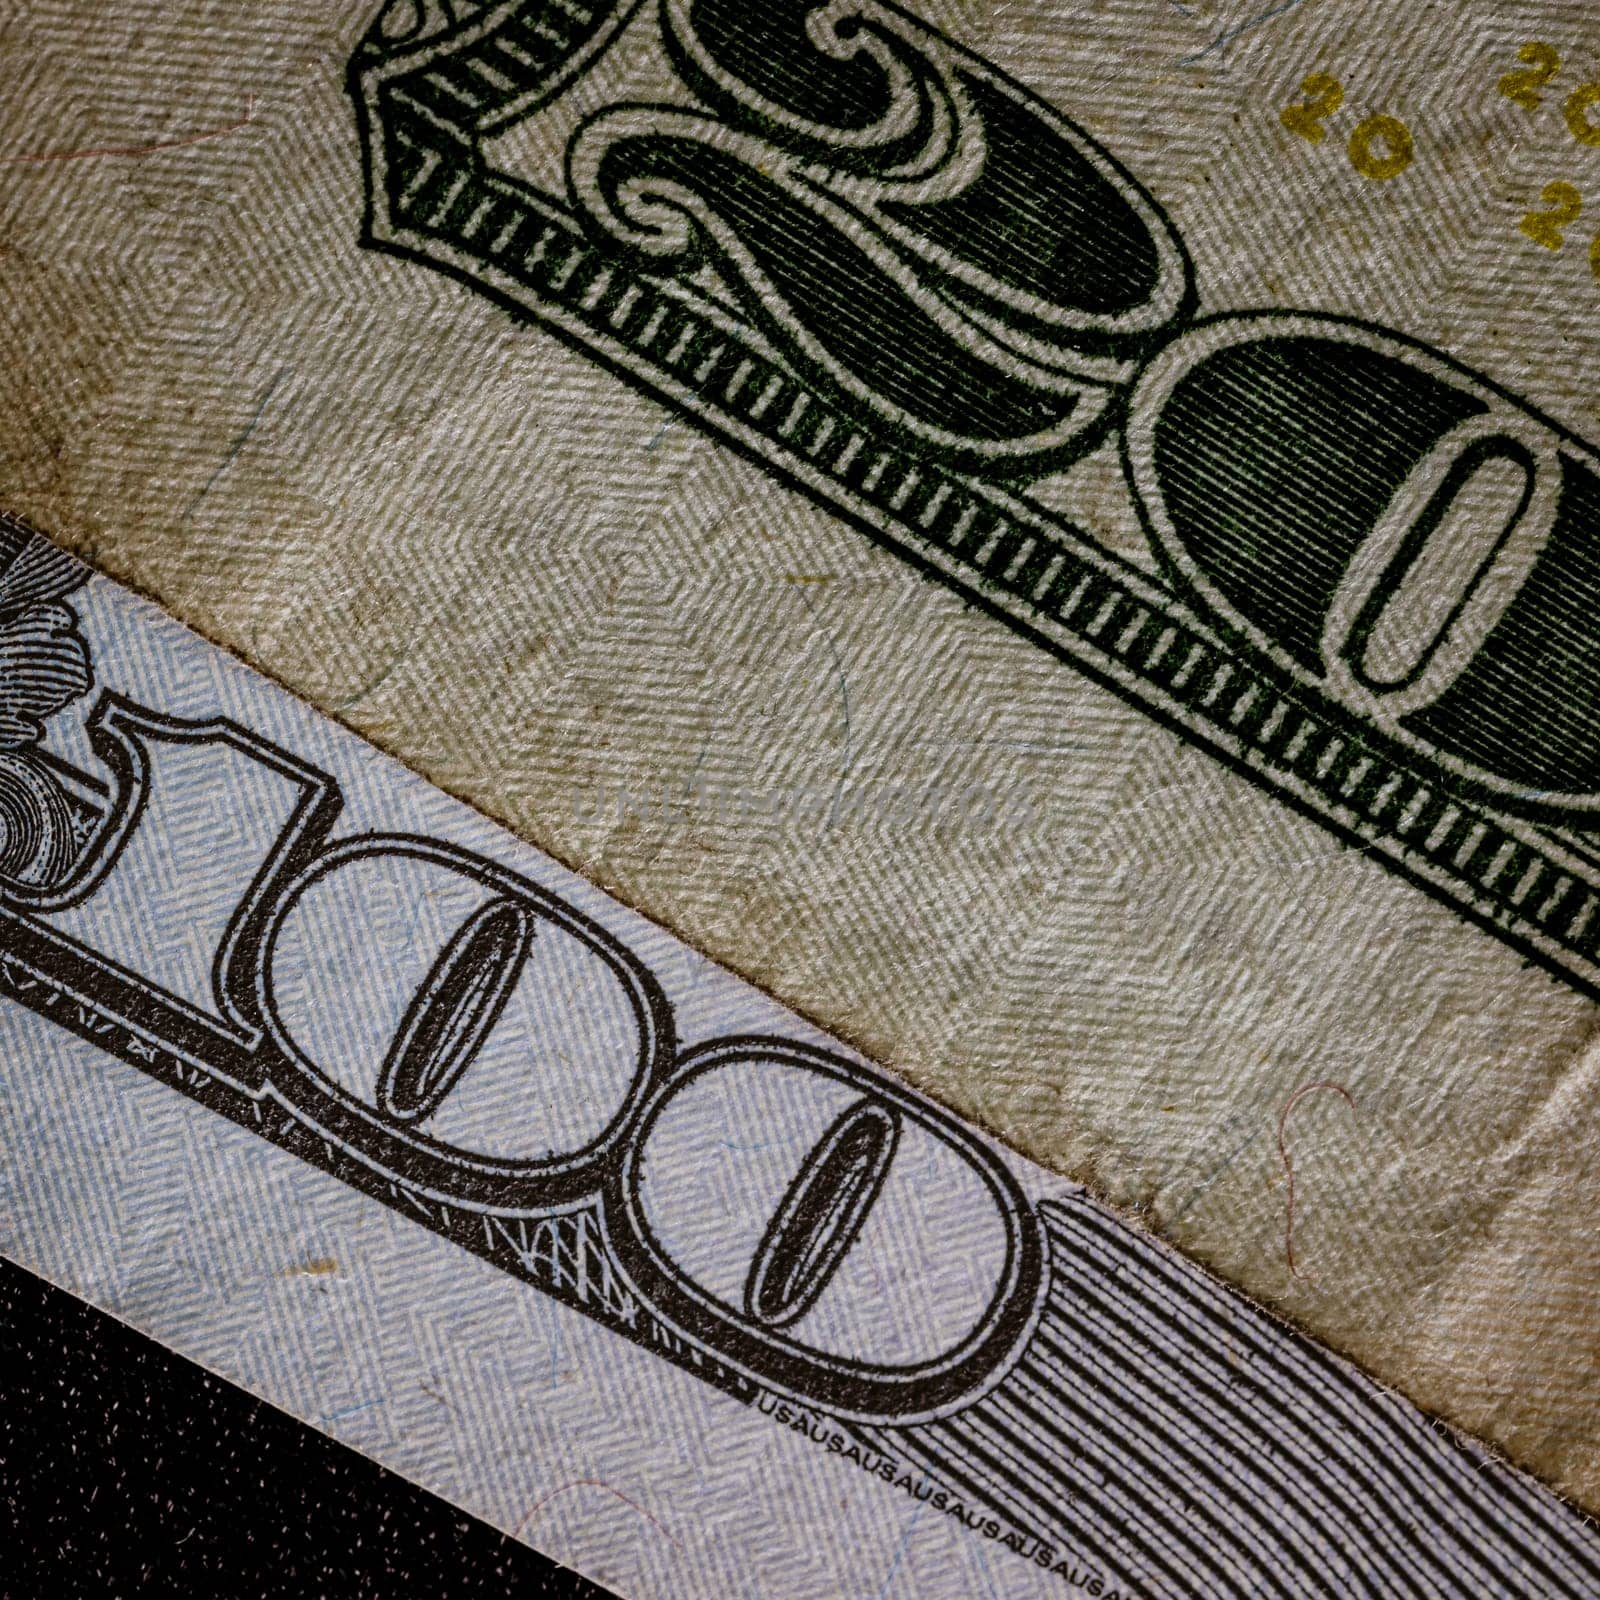 Macro shot of USD currency. USD inflation, US money